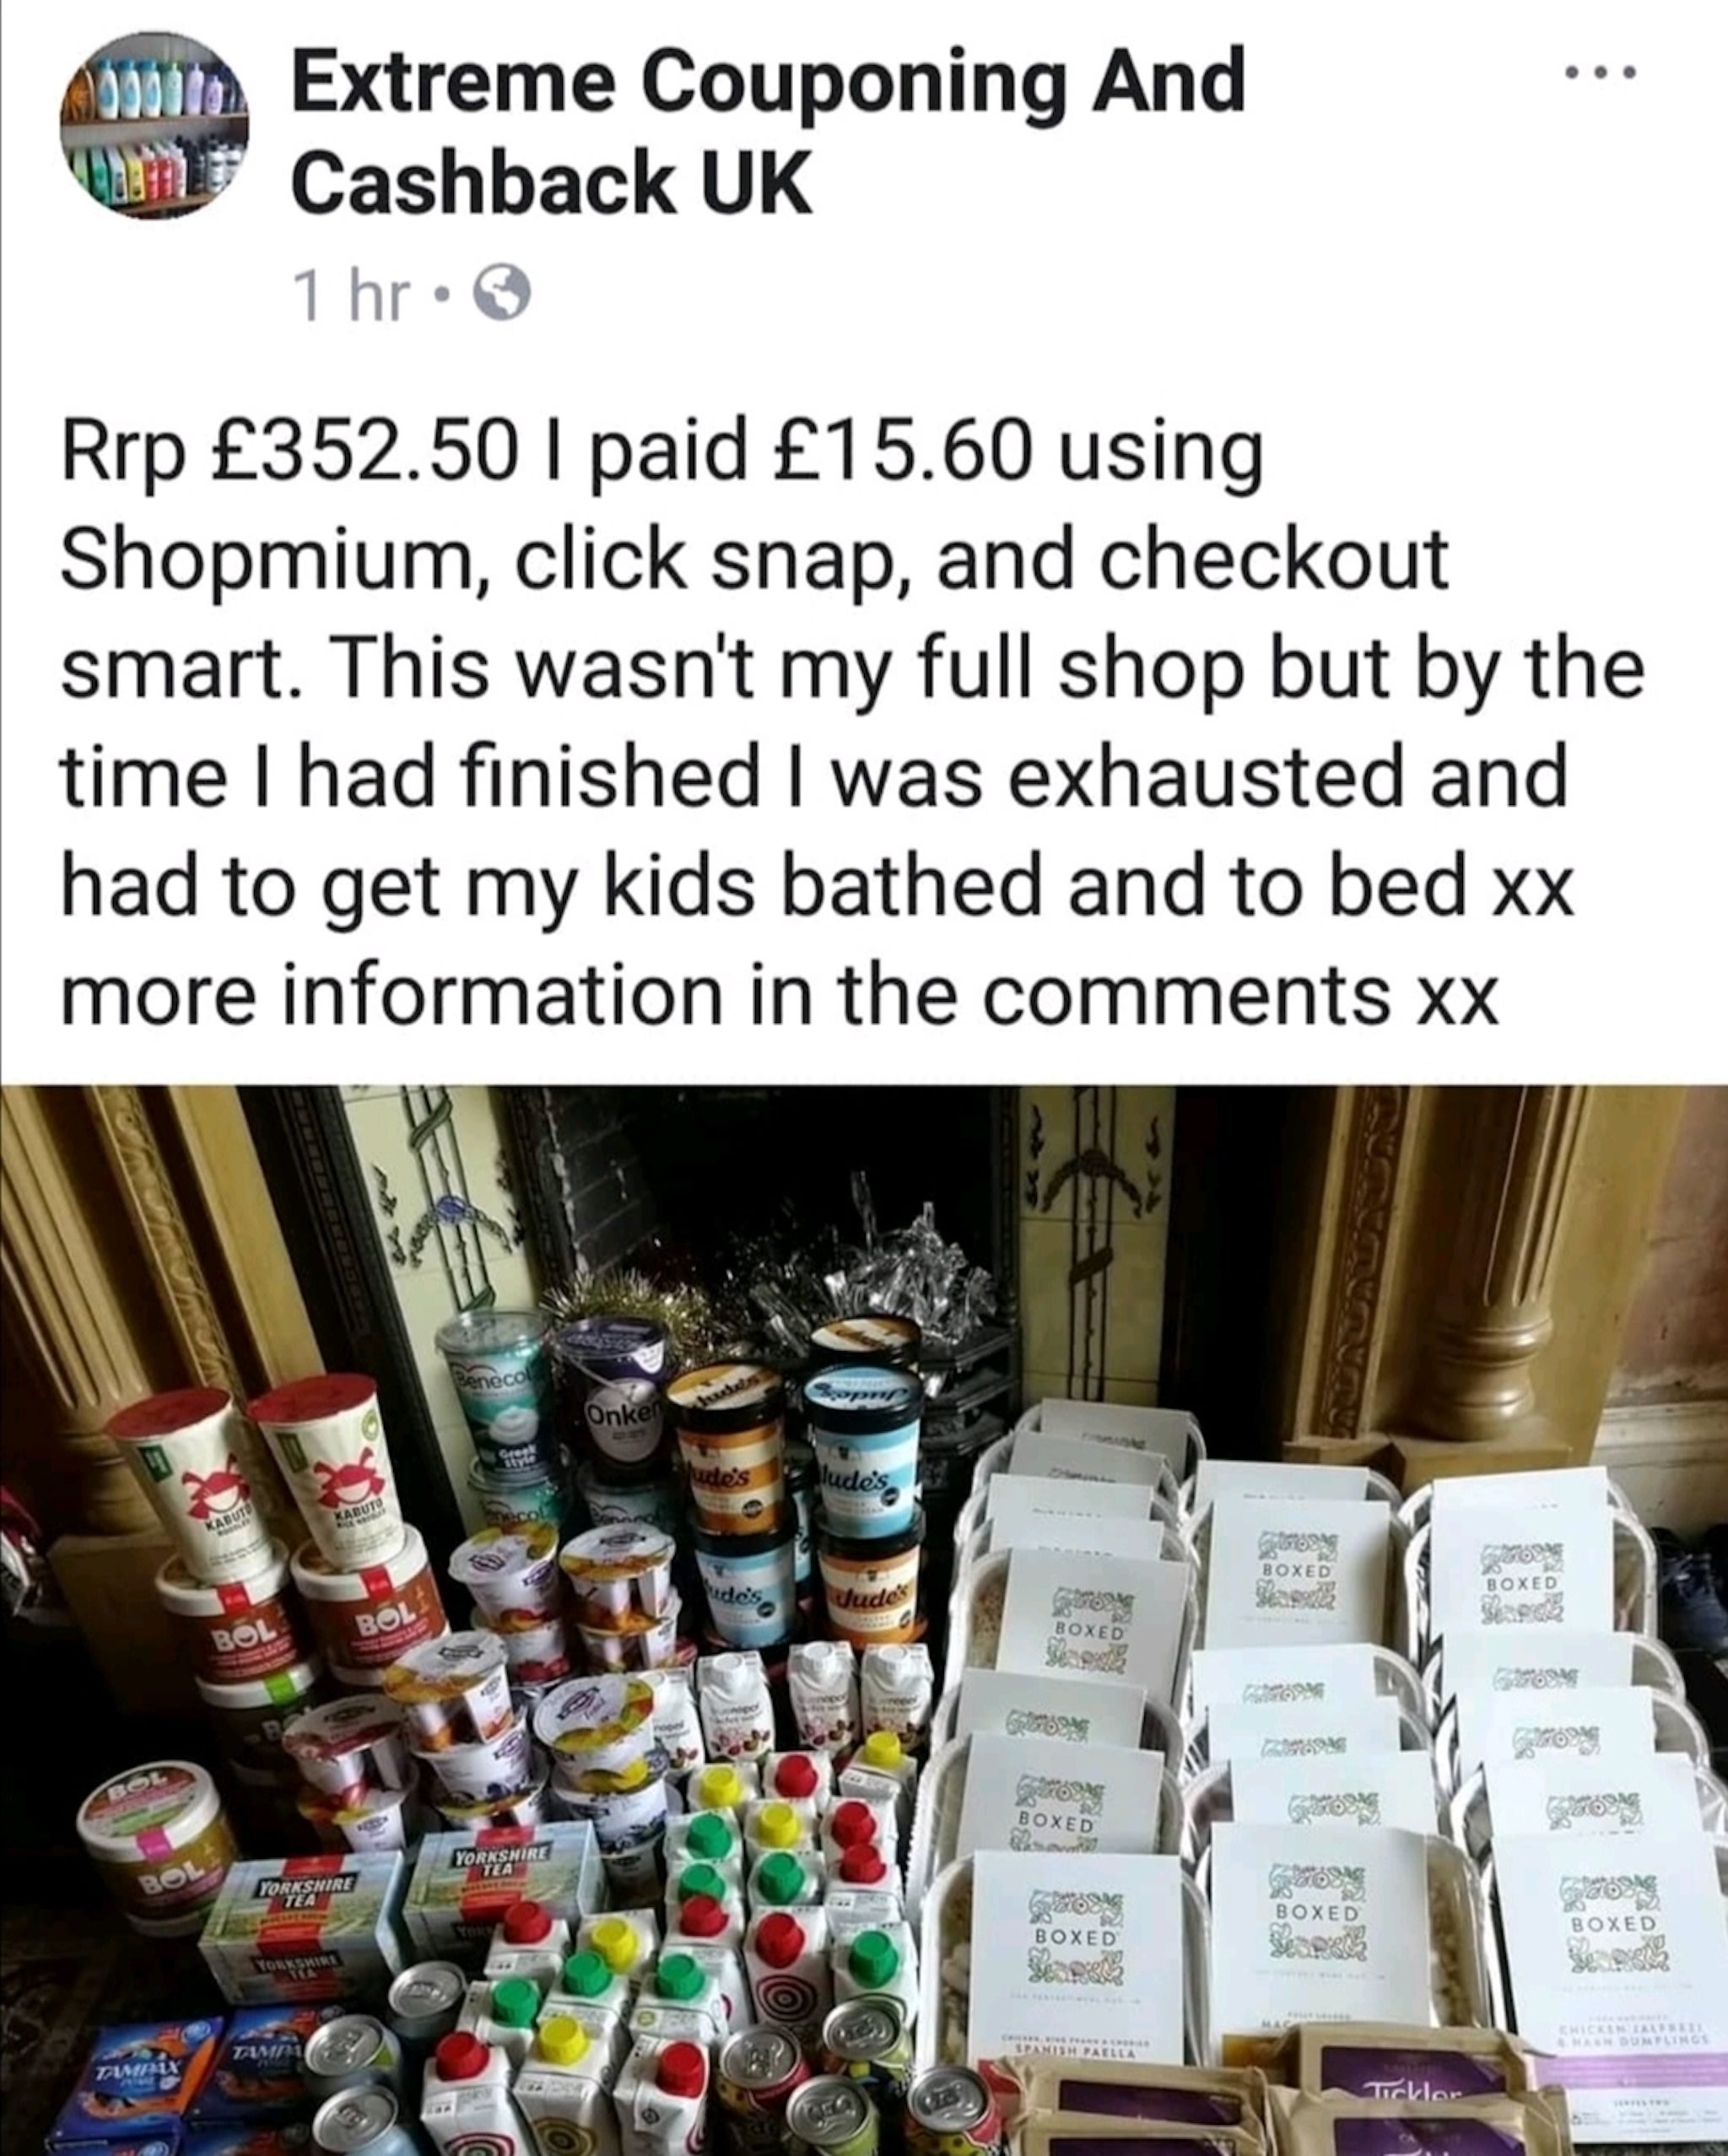 Aimee Balta, who did her whole Christmas shop last month for under ?50, shares cashback tips on her Facebook page